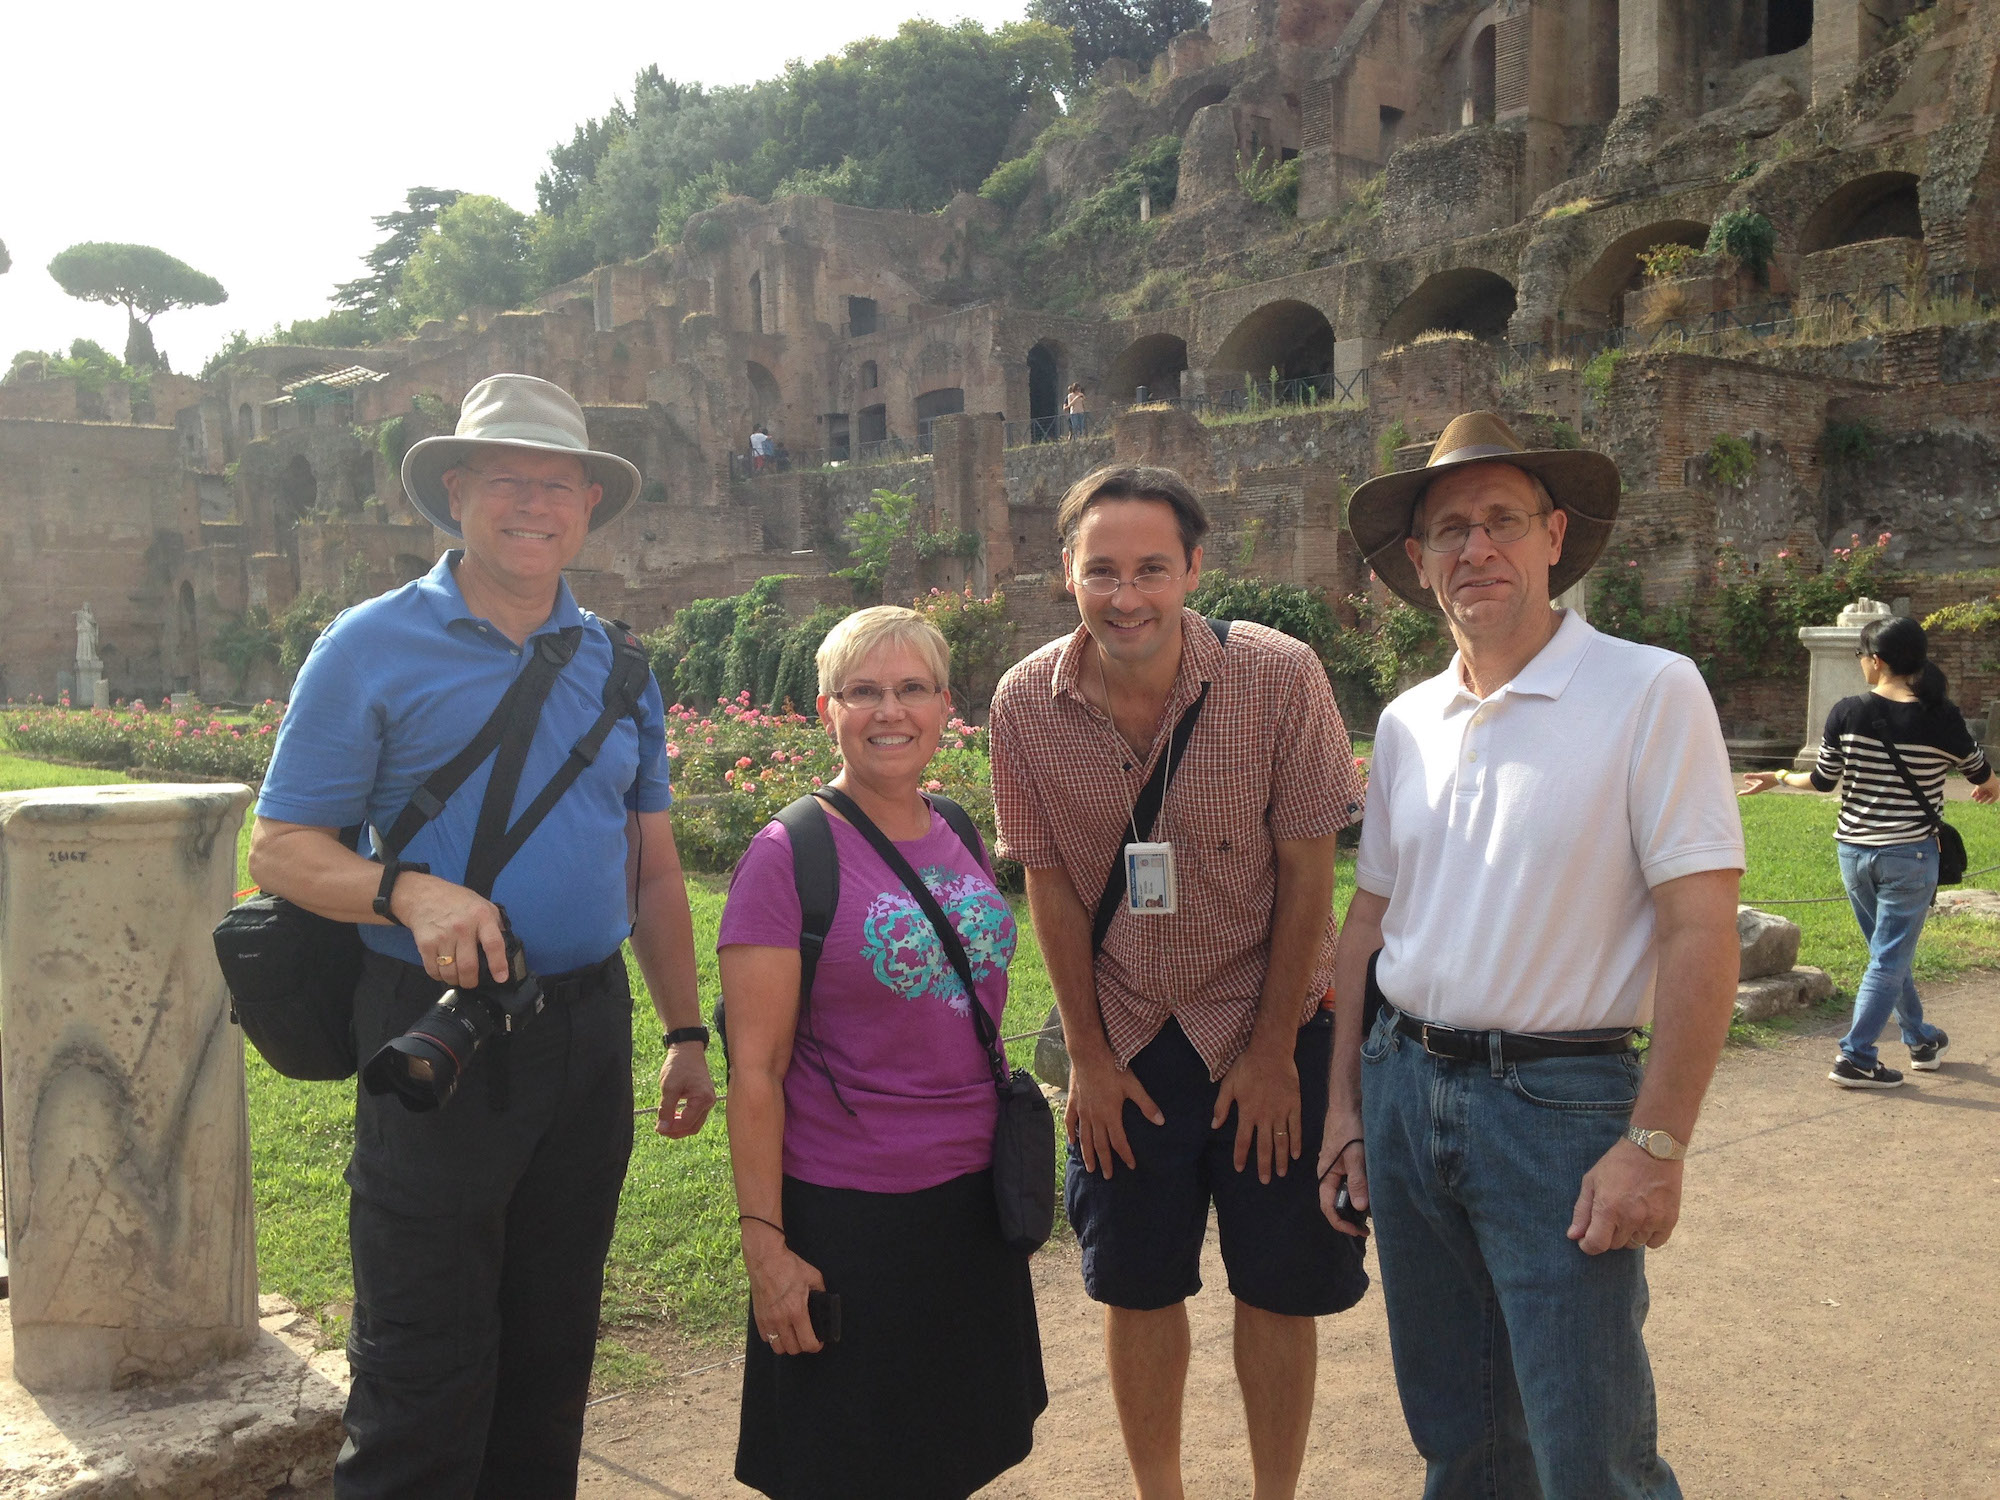 Rome Day Tours organize high quality walking tours with little to no wait in any line into places such as the Colosseuml. This is an image of Licensed Guide and American Rich Brunn leading a tour through the Imperial Forum, nearby the Colosseum